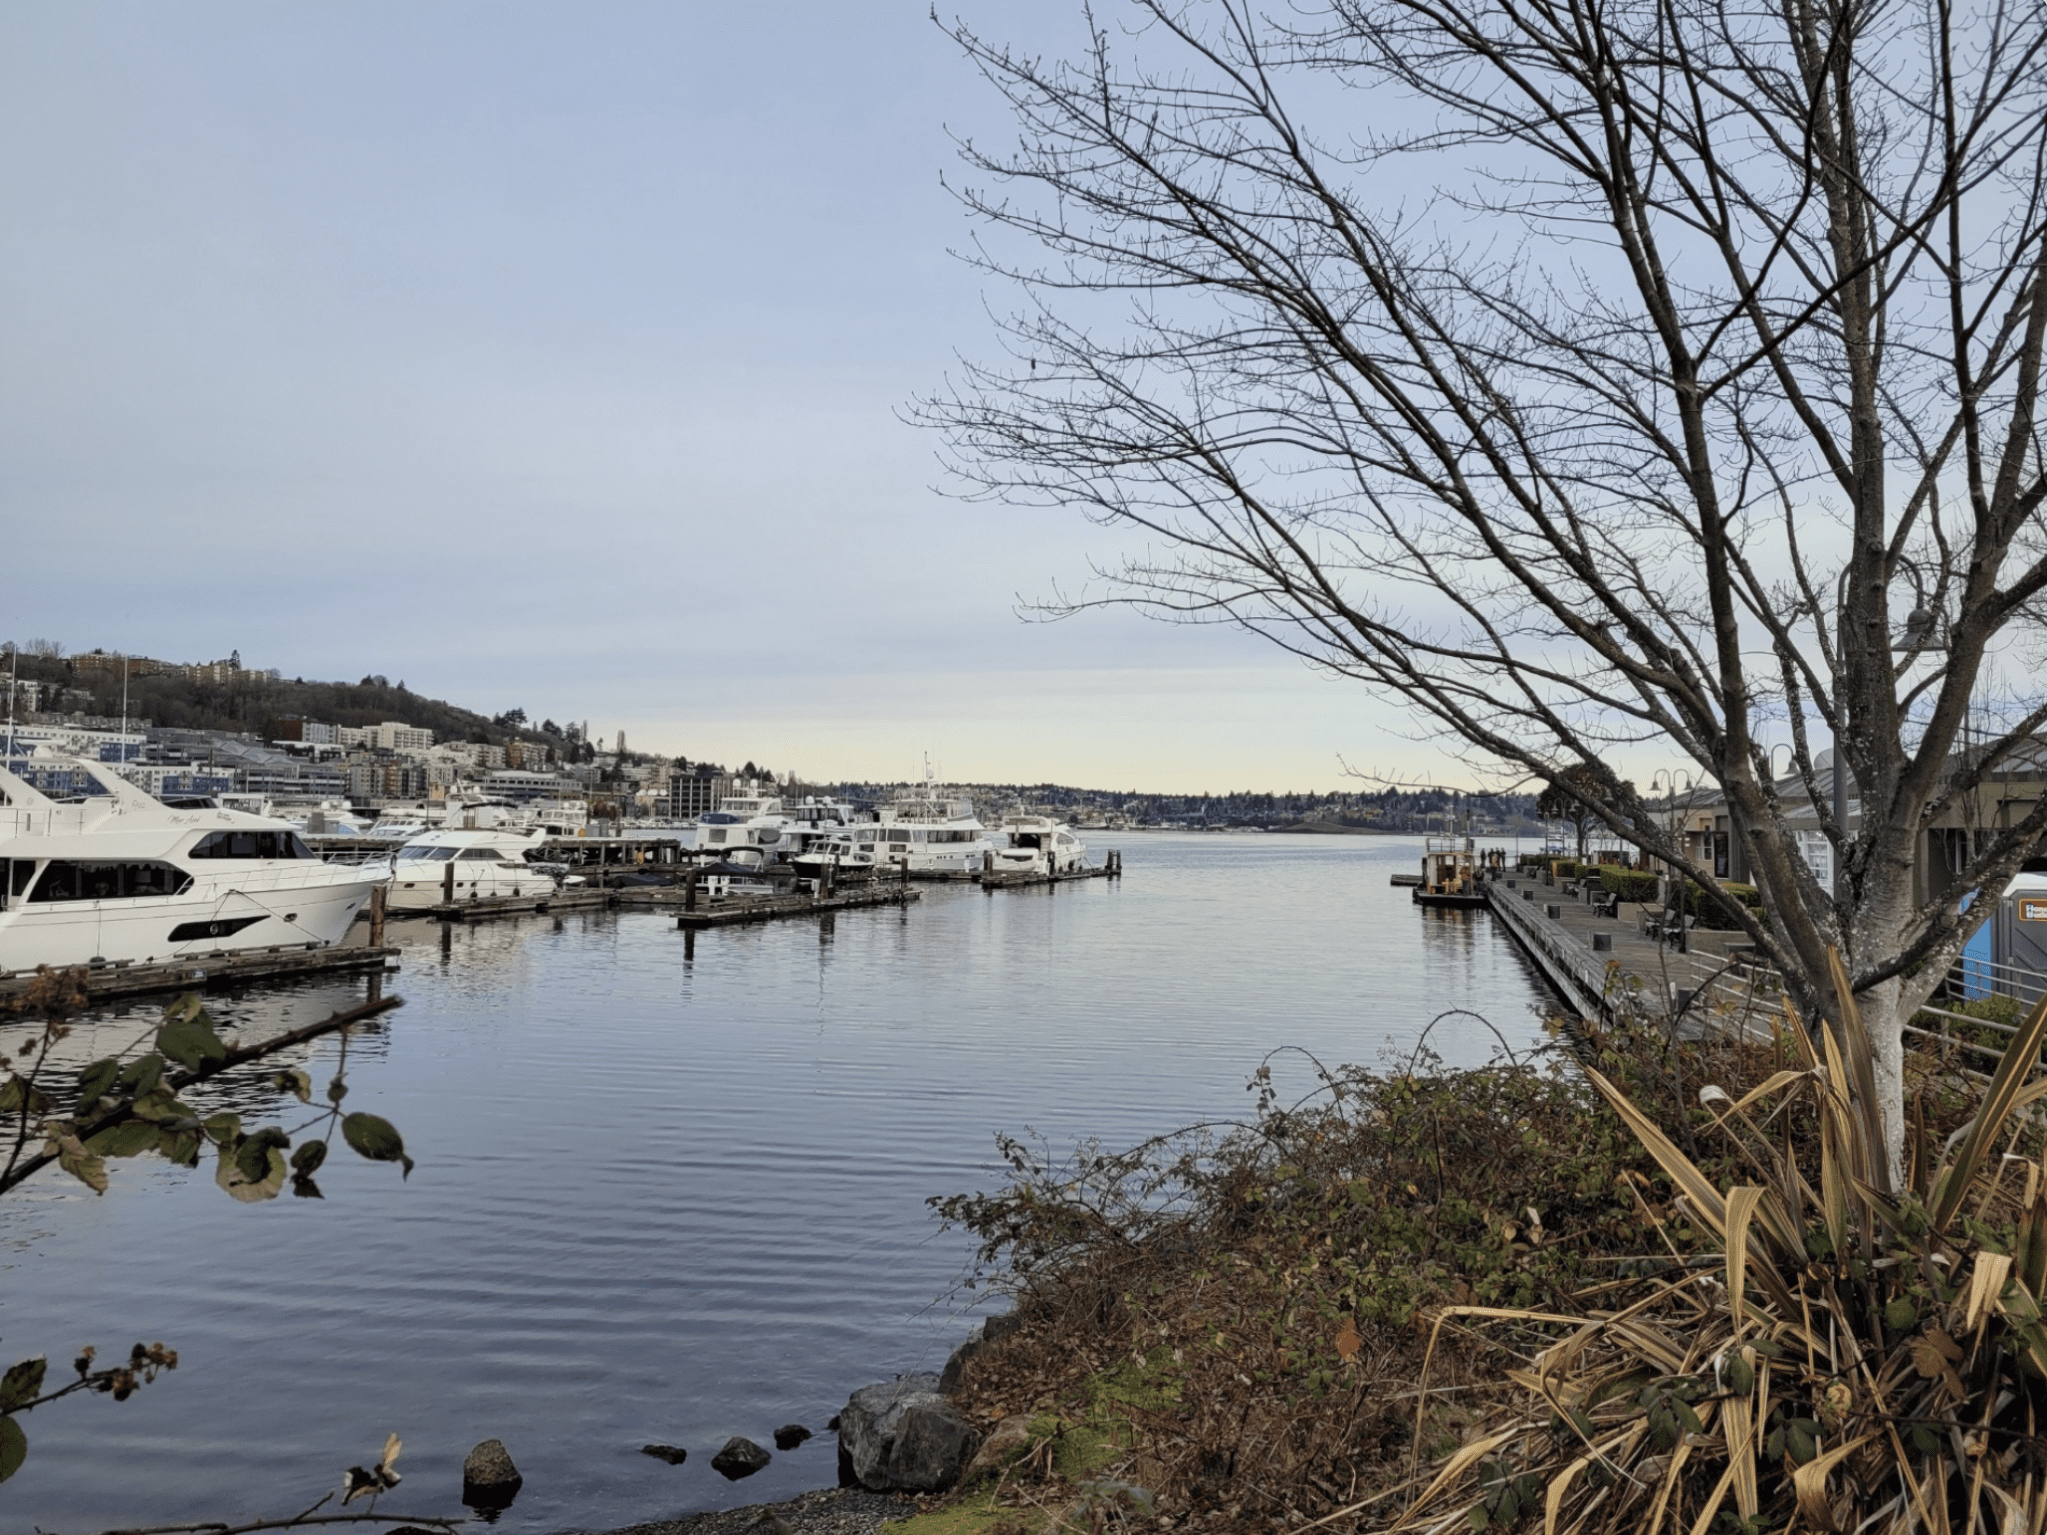 Police Recover Body From South Lake Union, No Signs of Foul Play